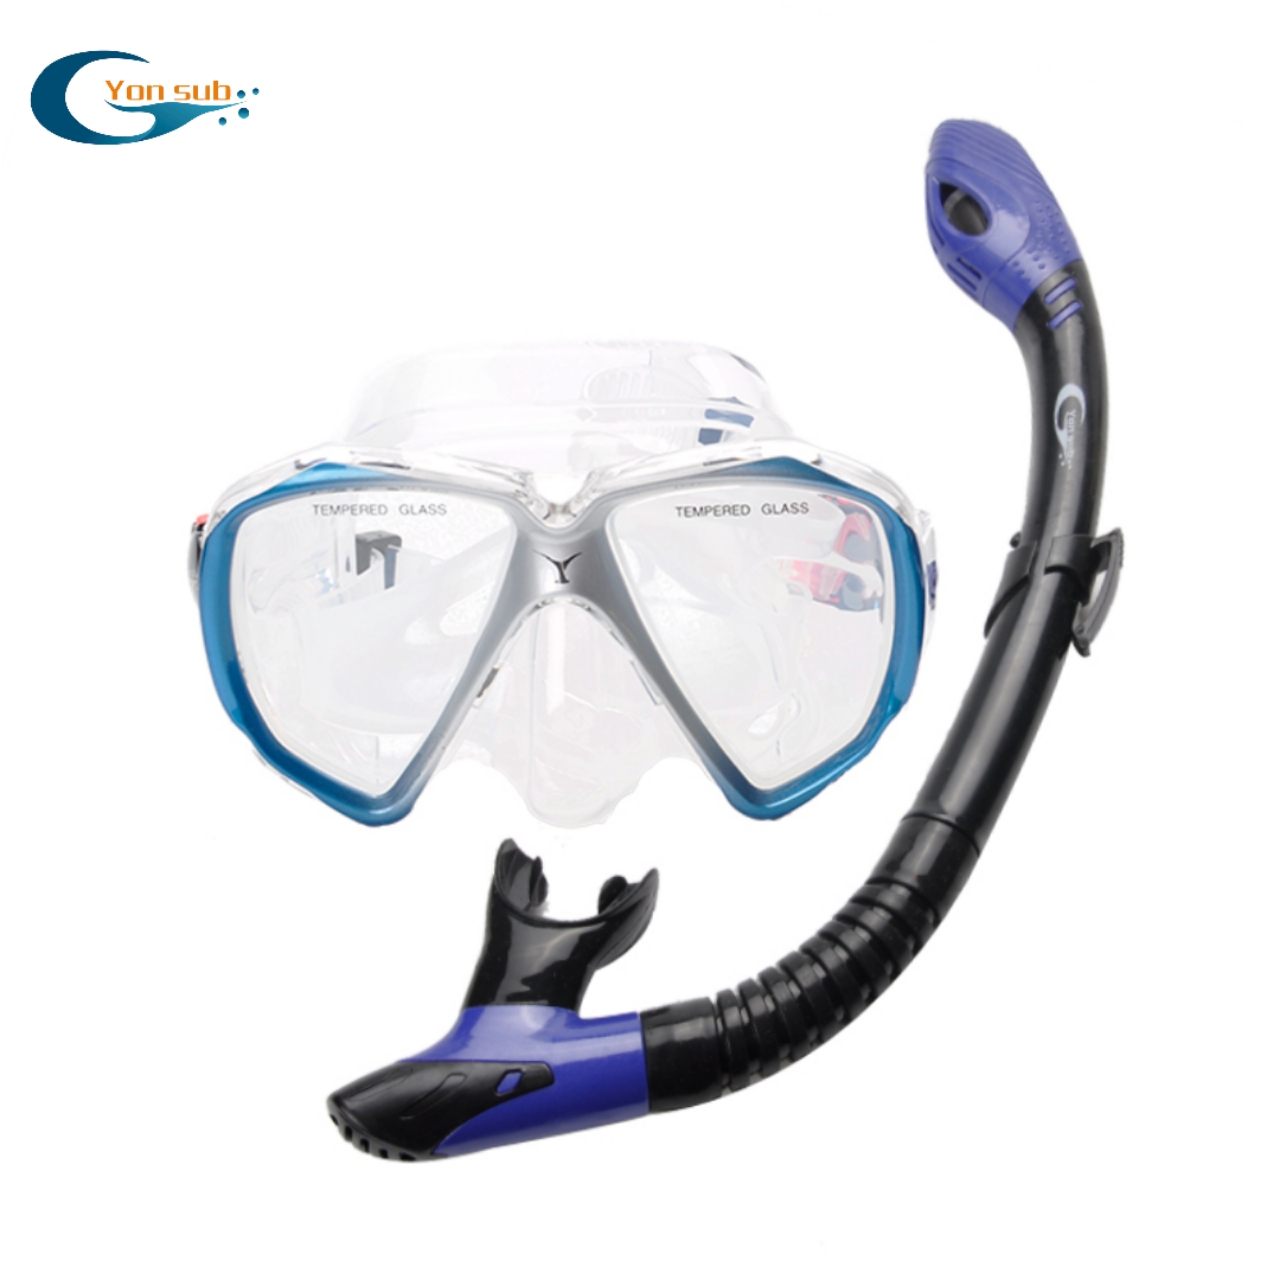 Silicone diving mask and snorkel